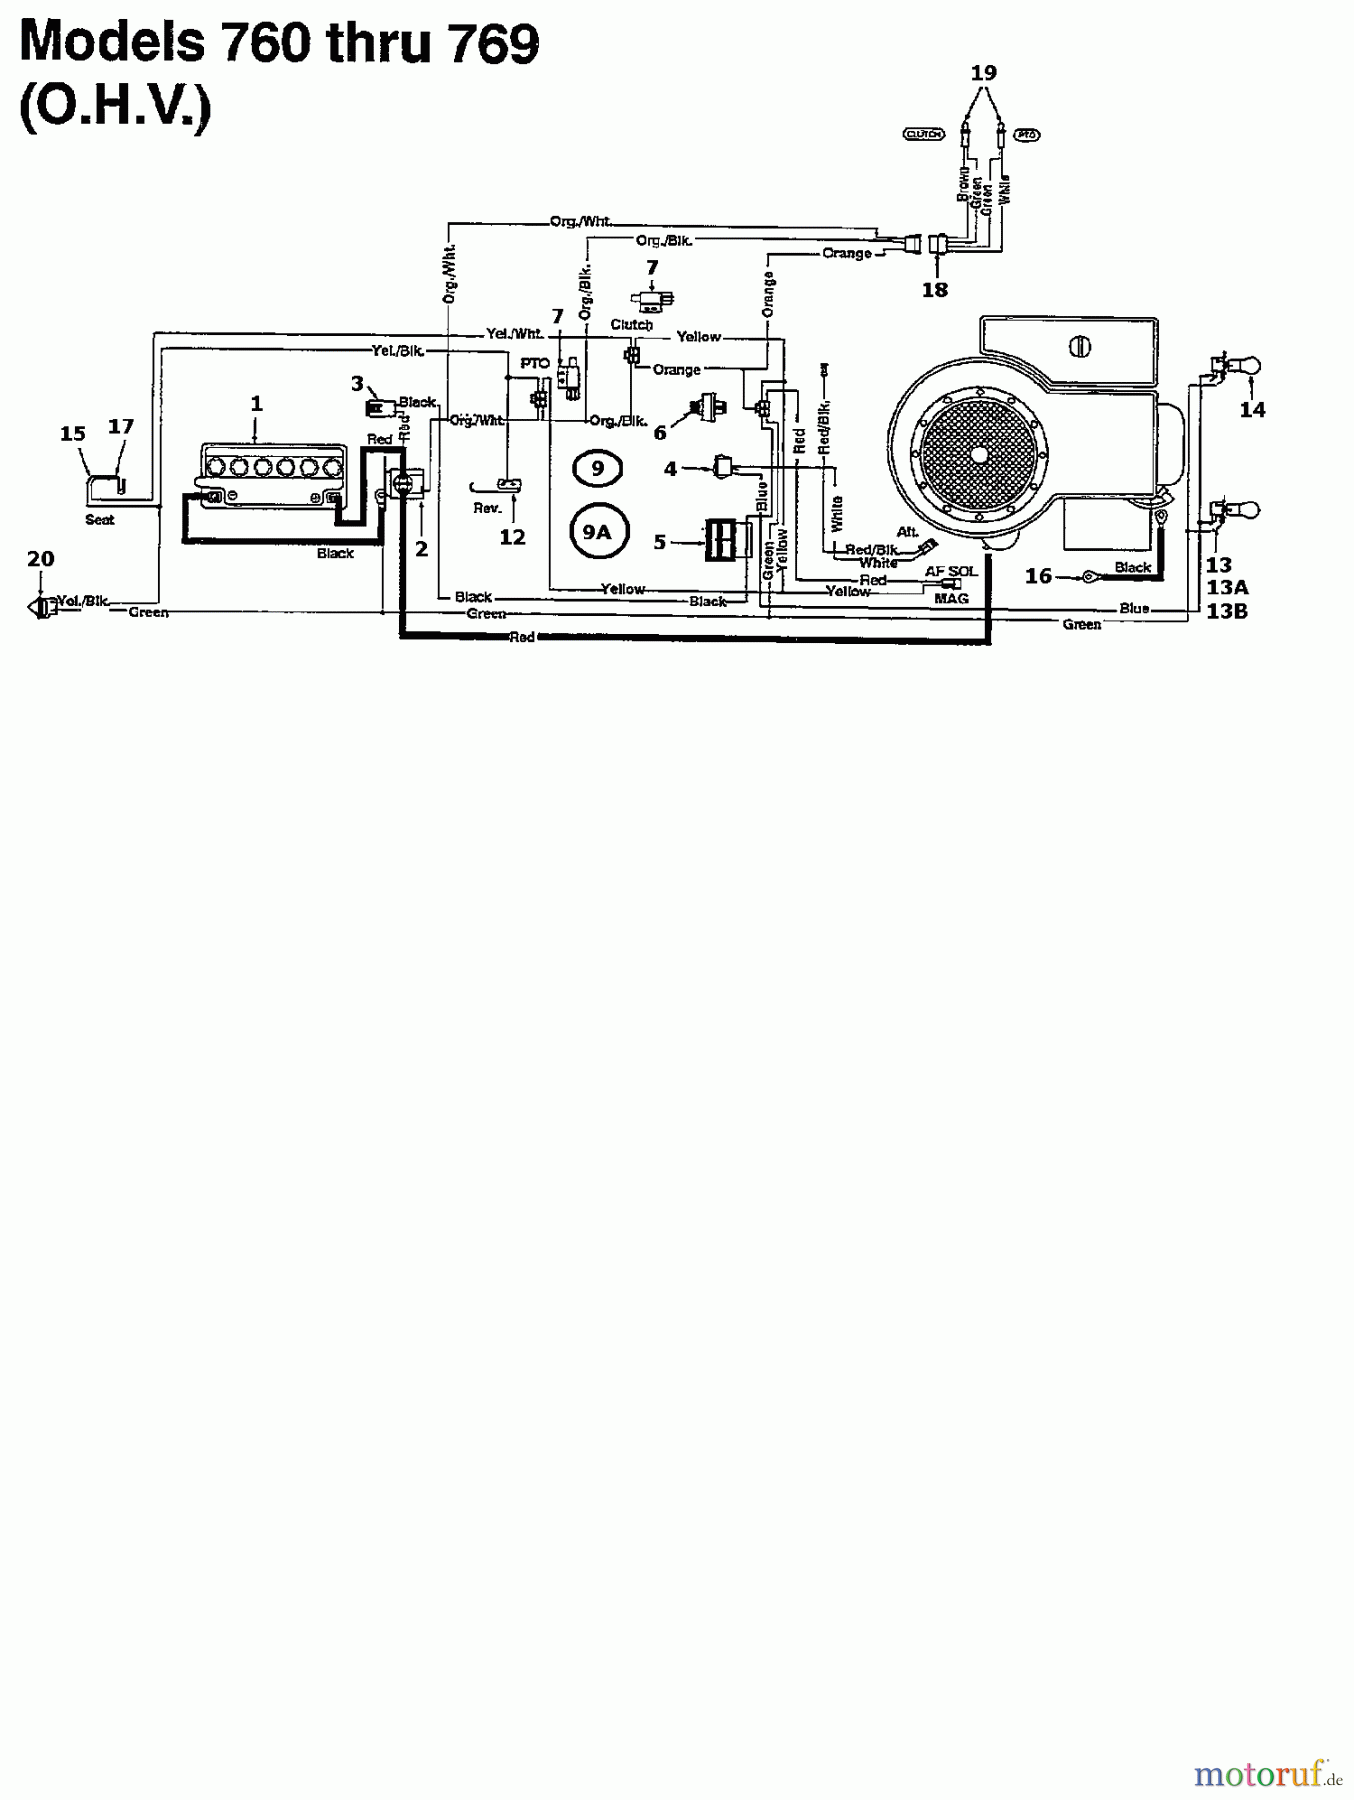  Columbia Lawn tractors 125/102 135K761N626  (1995) Wiring diagram for O.H.V.